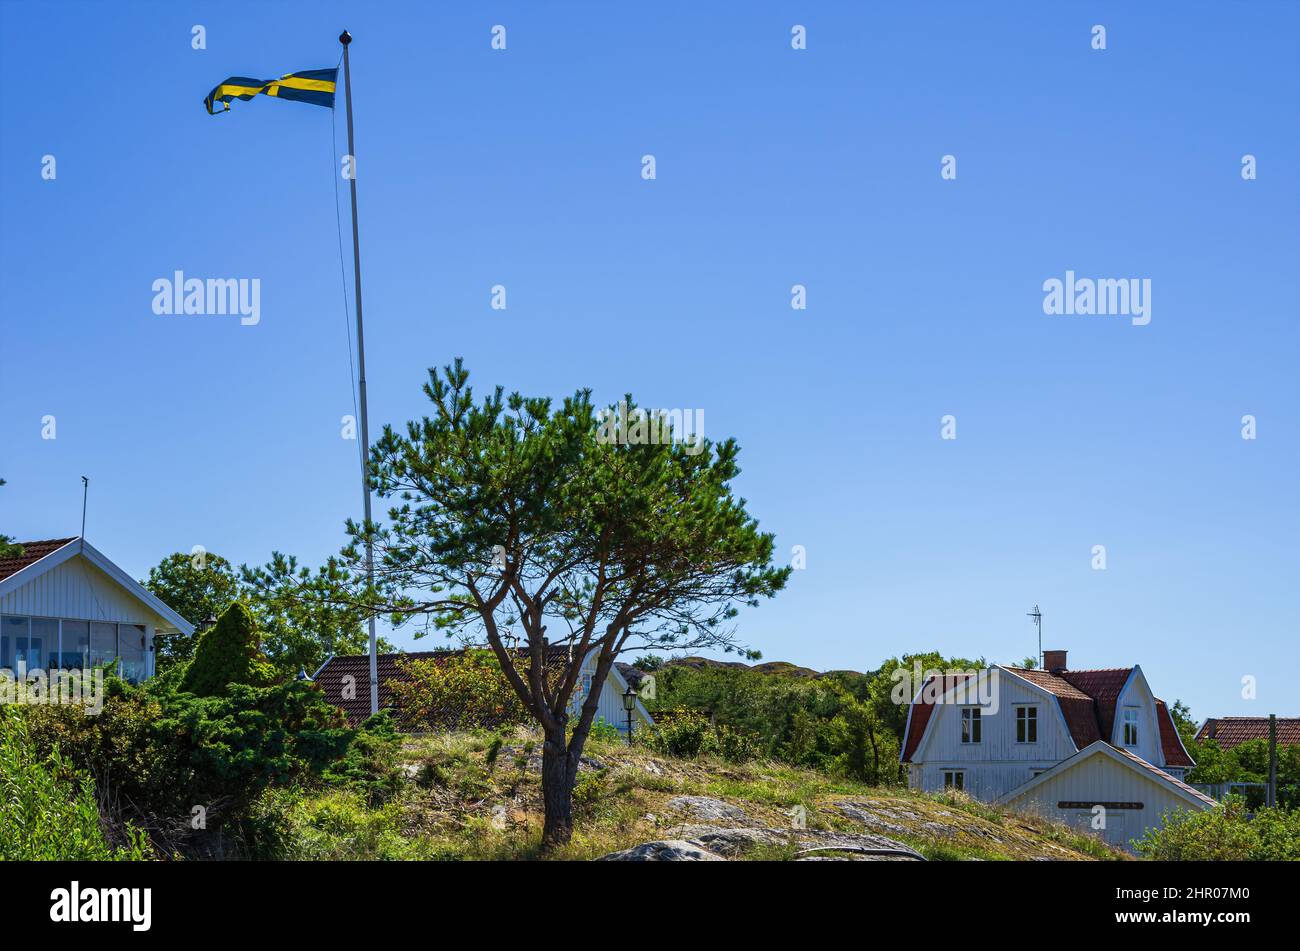 The Swedish national flag flies on a flagpole in the wind on a hill in a settlement of country houses on South Koster Island, Bohuslän, Sweden. Stock Photo